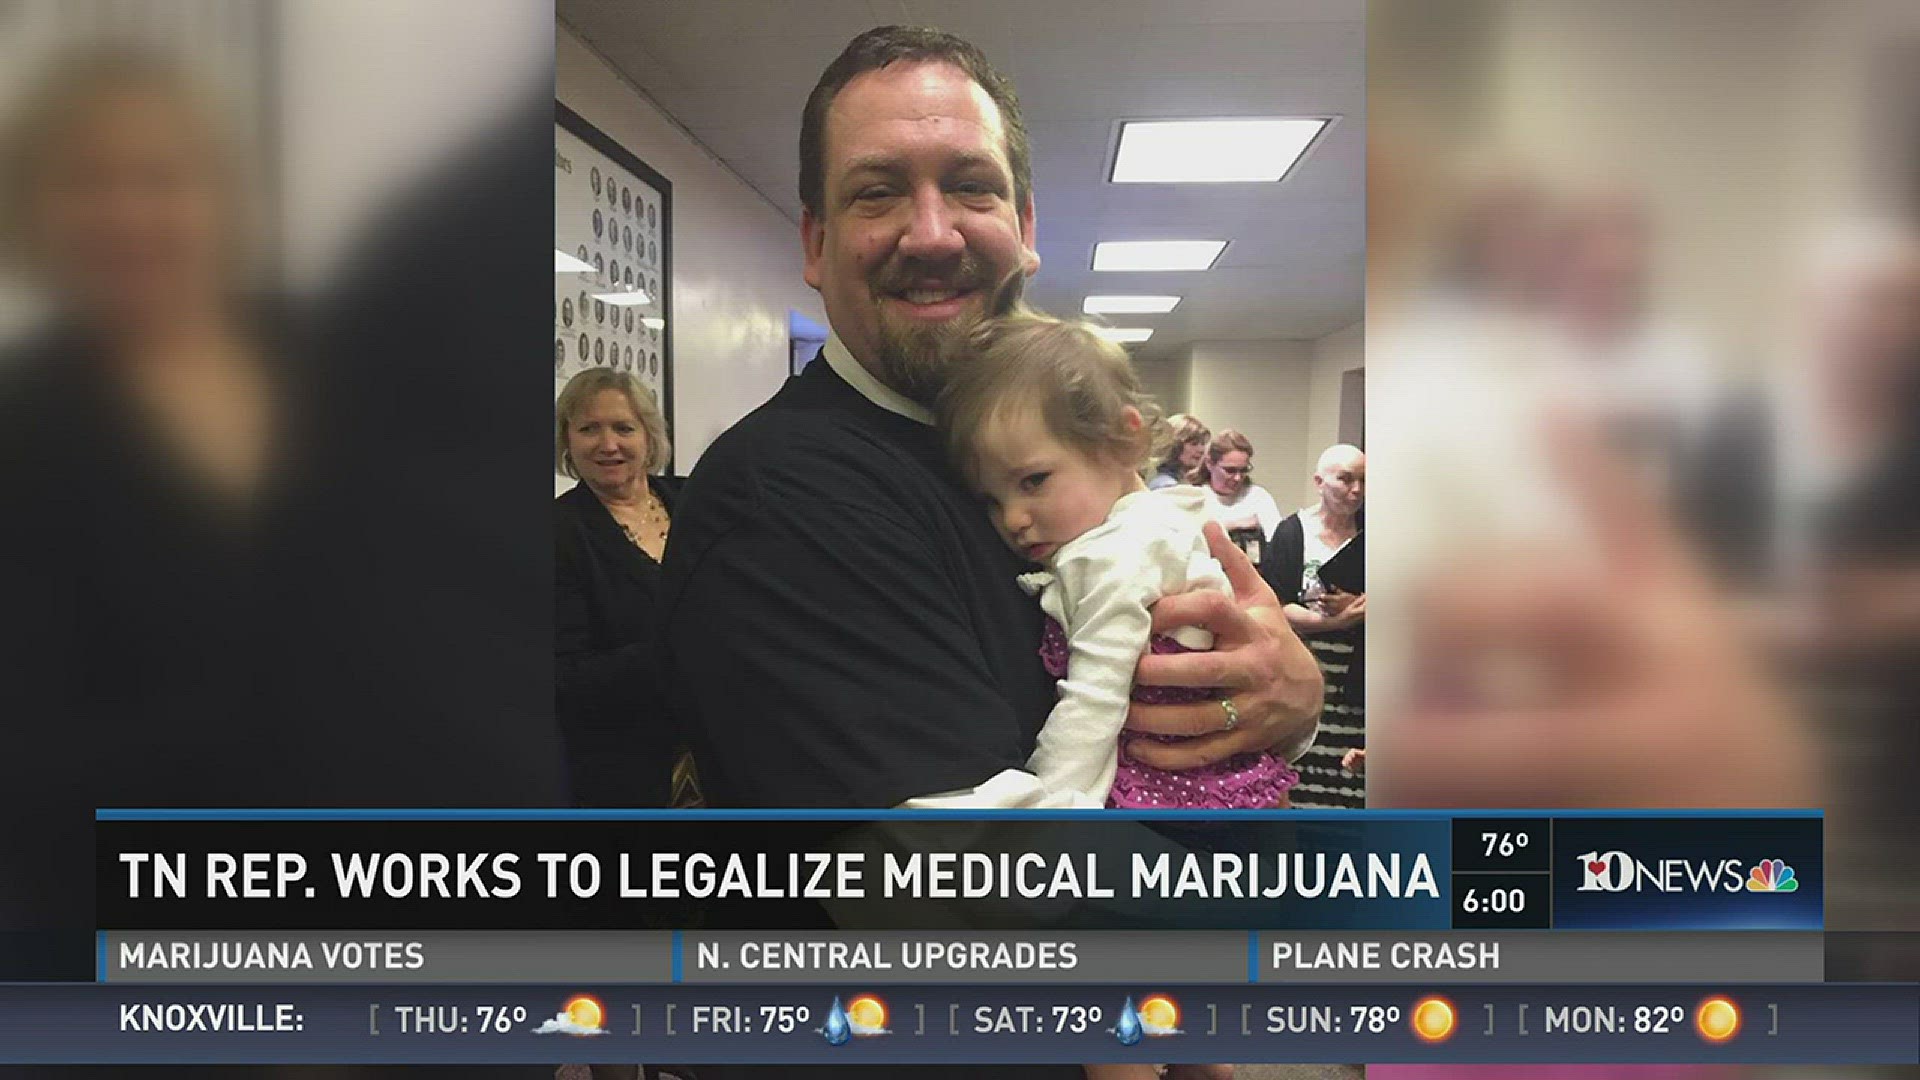 Oct. 12, 2016: An East Tennessee lawmaker says he sees major benefits in medical marijuana, and would like to see it legalized in the Volunteer State.